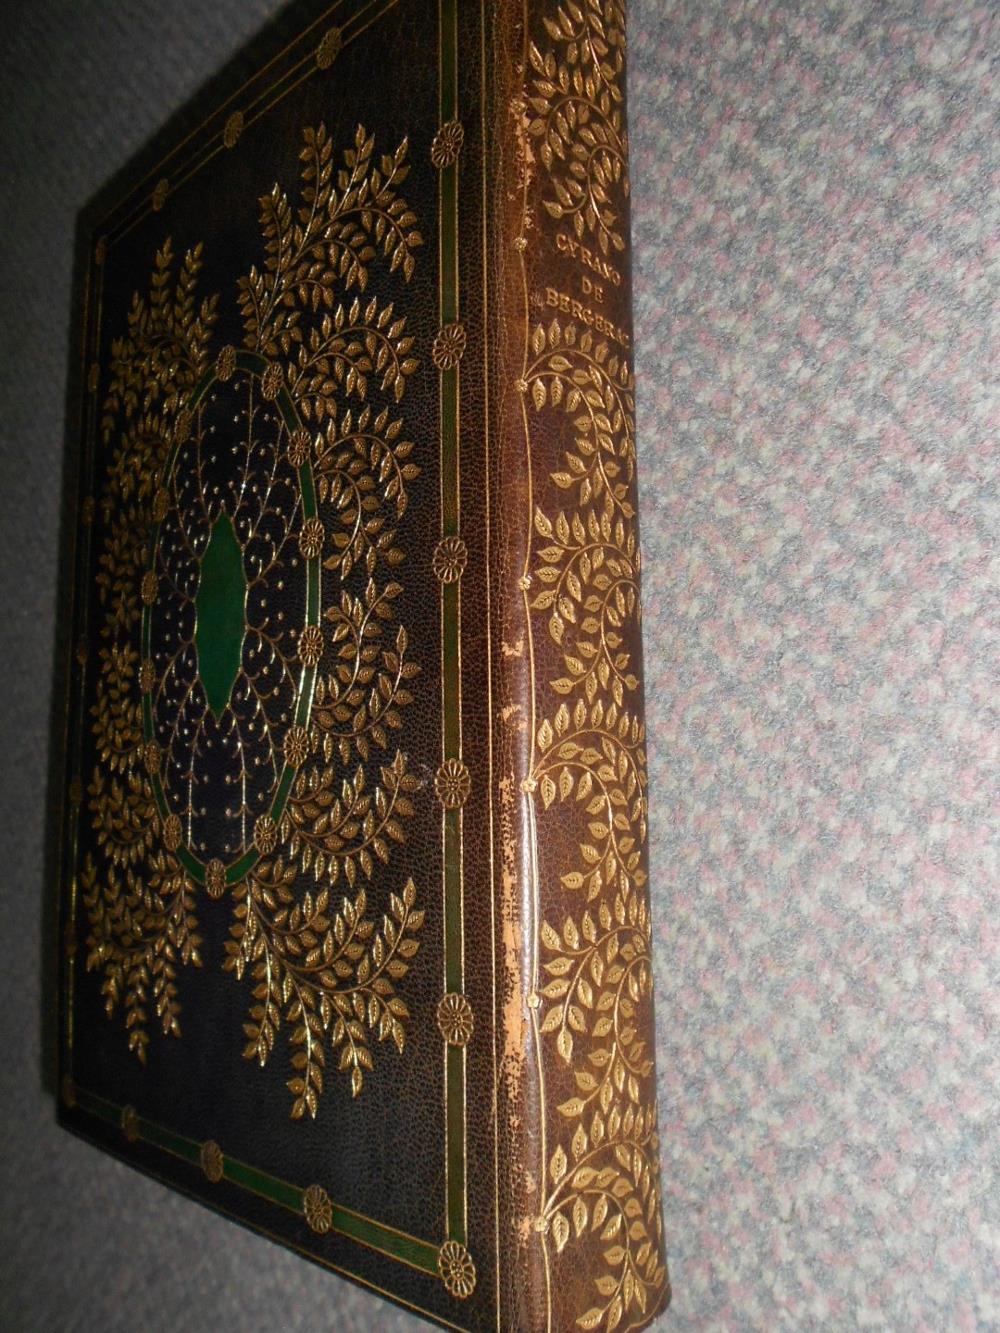 Fine Binding. ROSTAND (Edmond) Cyrano de Bergerac, Paris 1899, large 8vo, illustrated, bound with an - Image 2 of 8